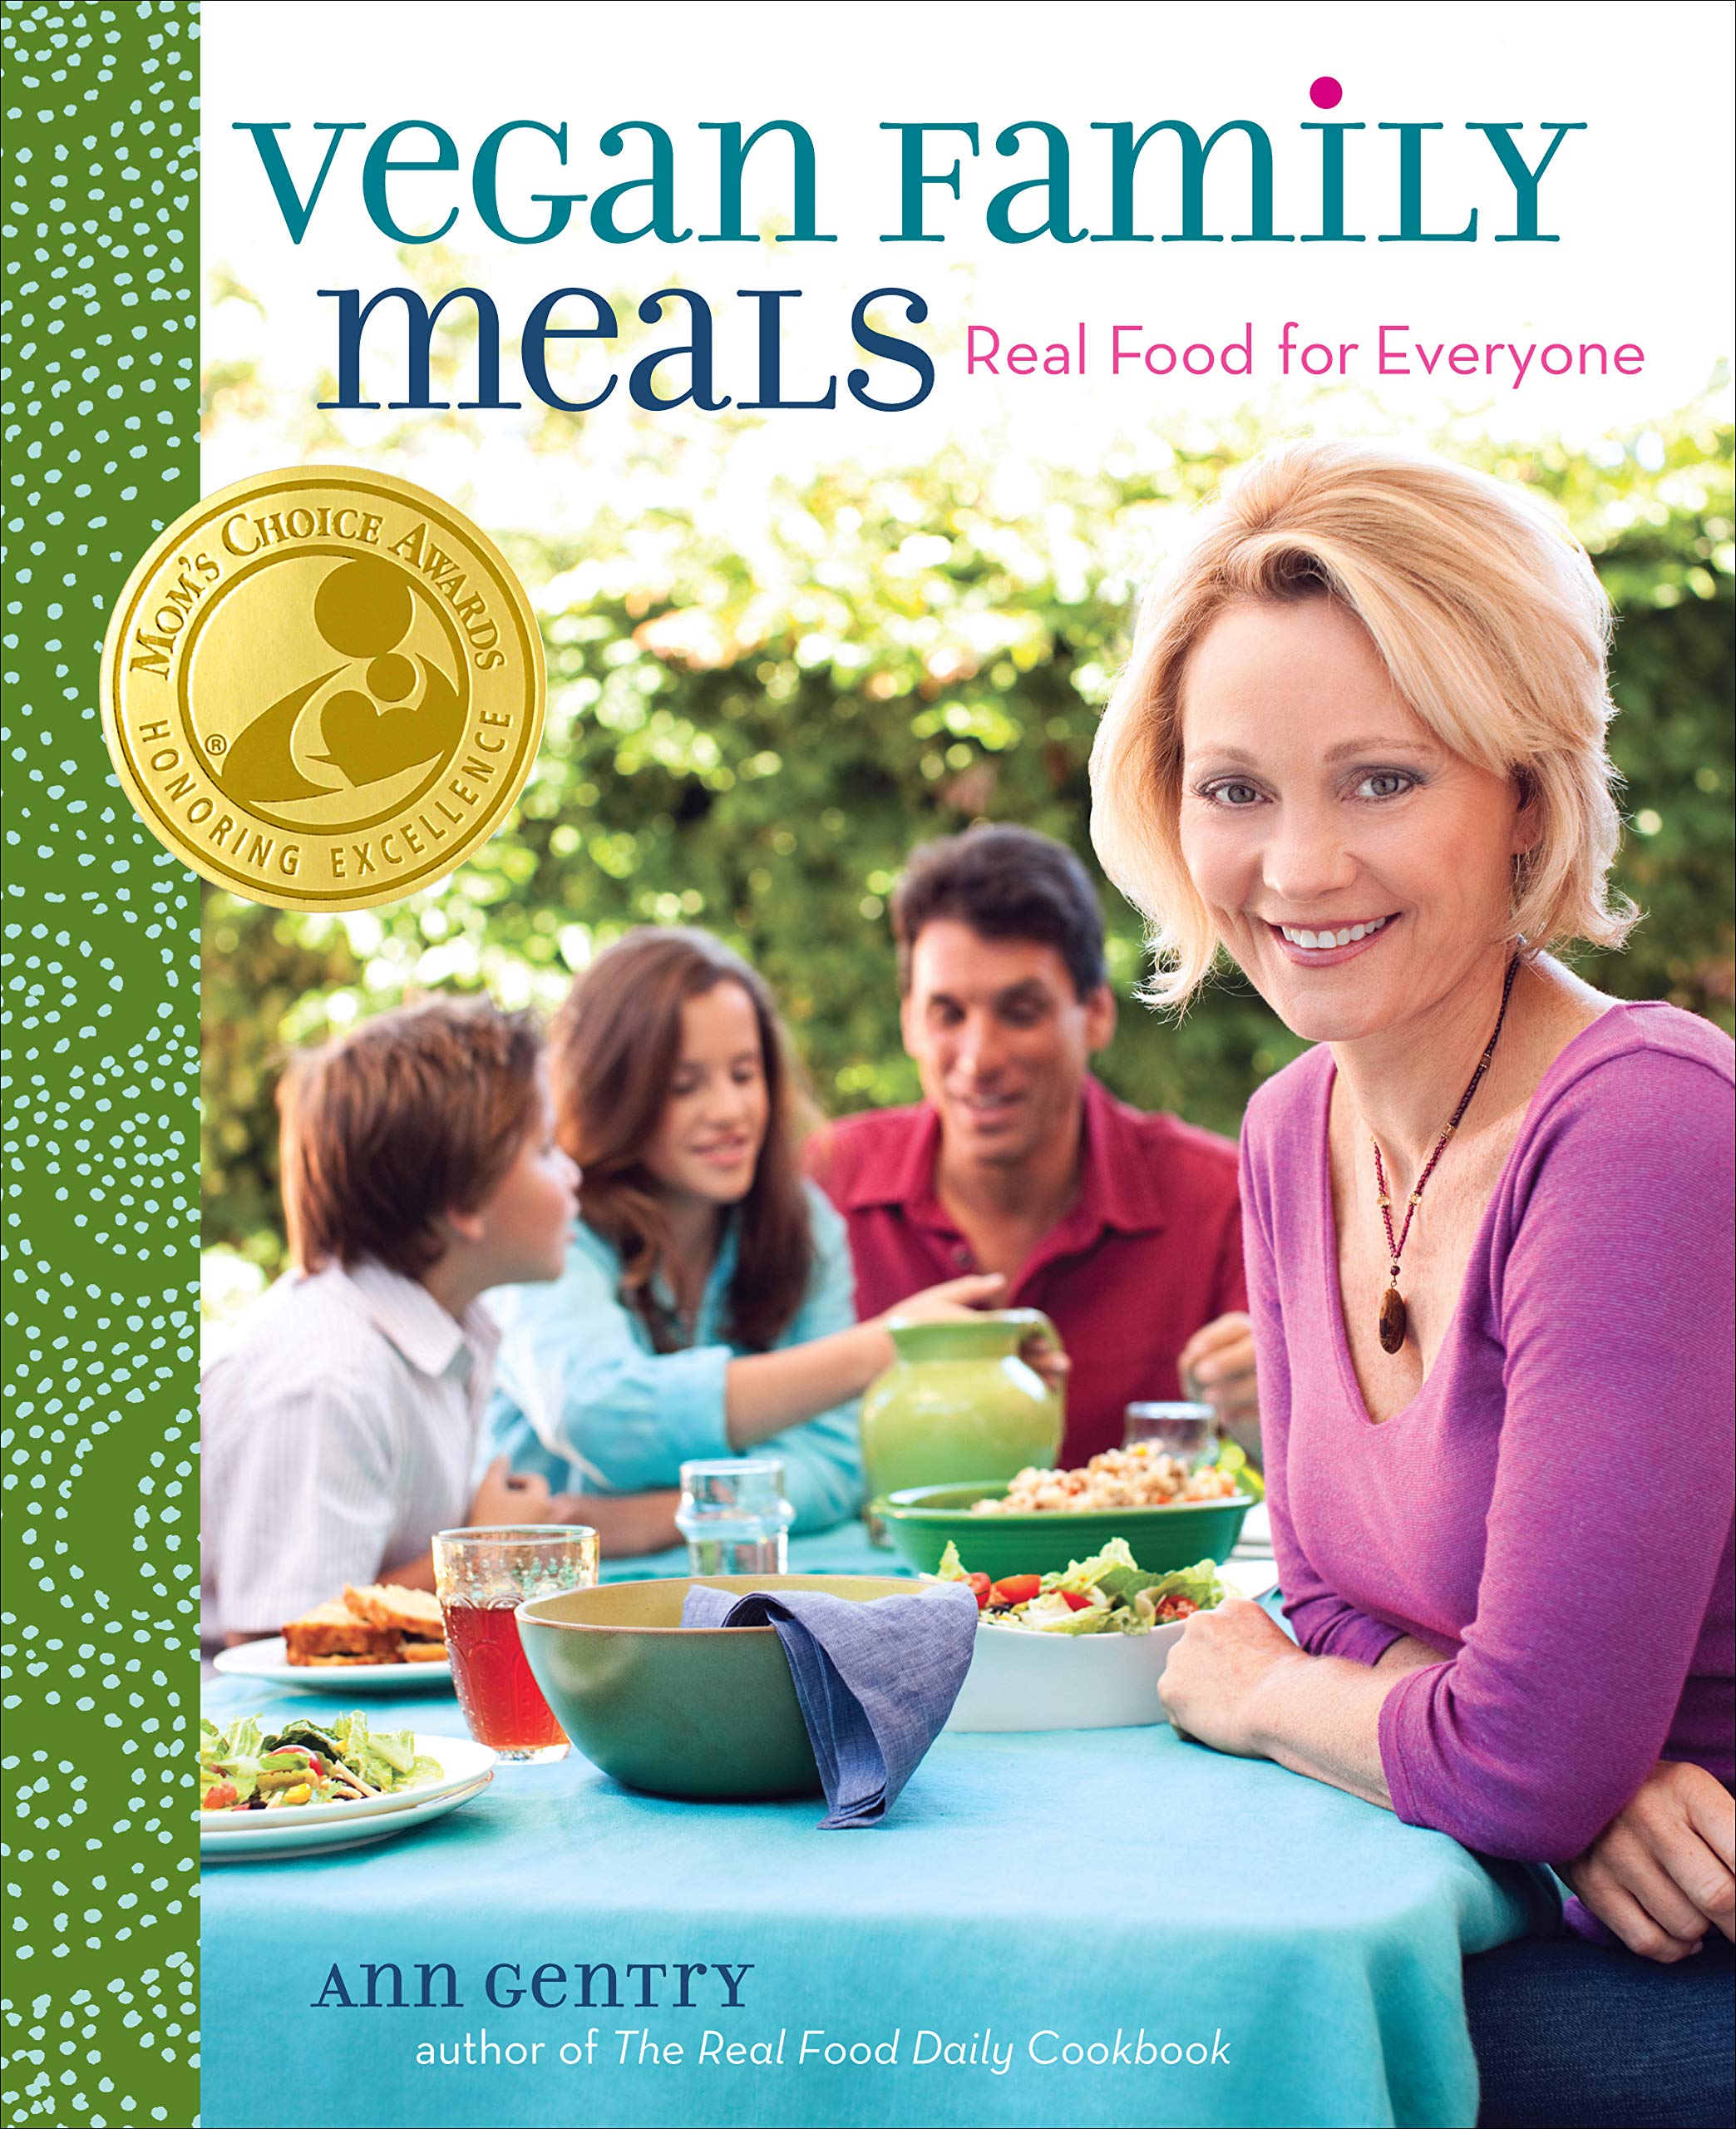 *Sale* Vegan Family Meals: Real Food for Everyone (Ann Gentry)